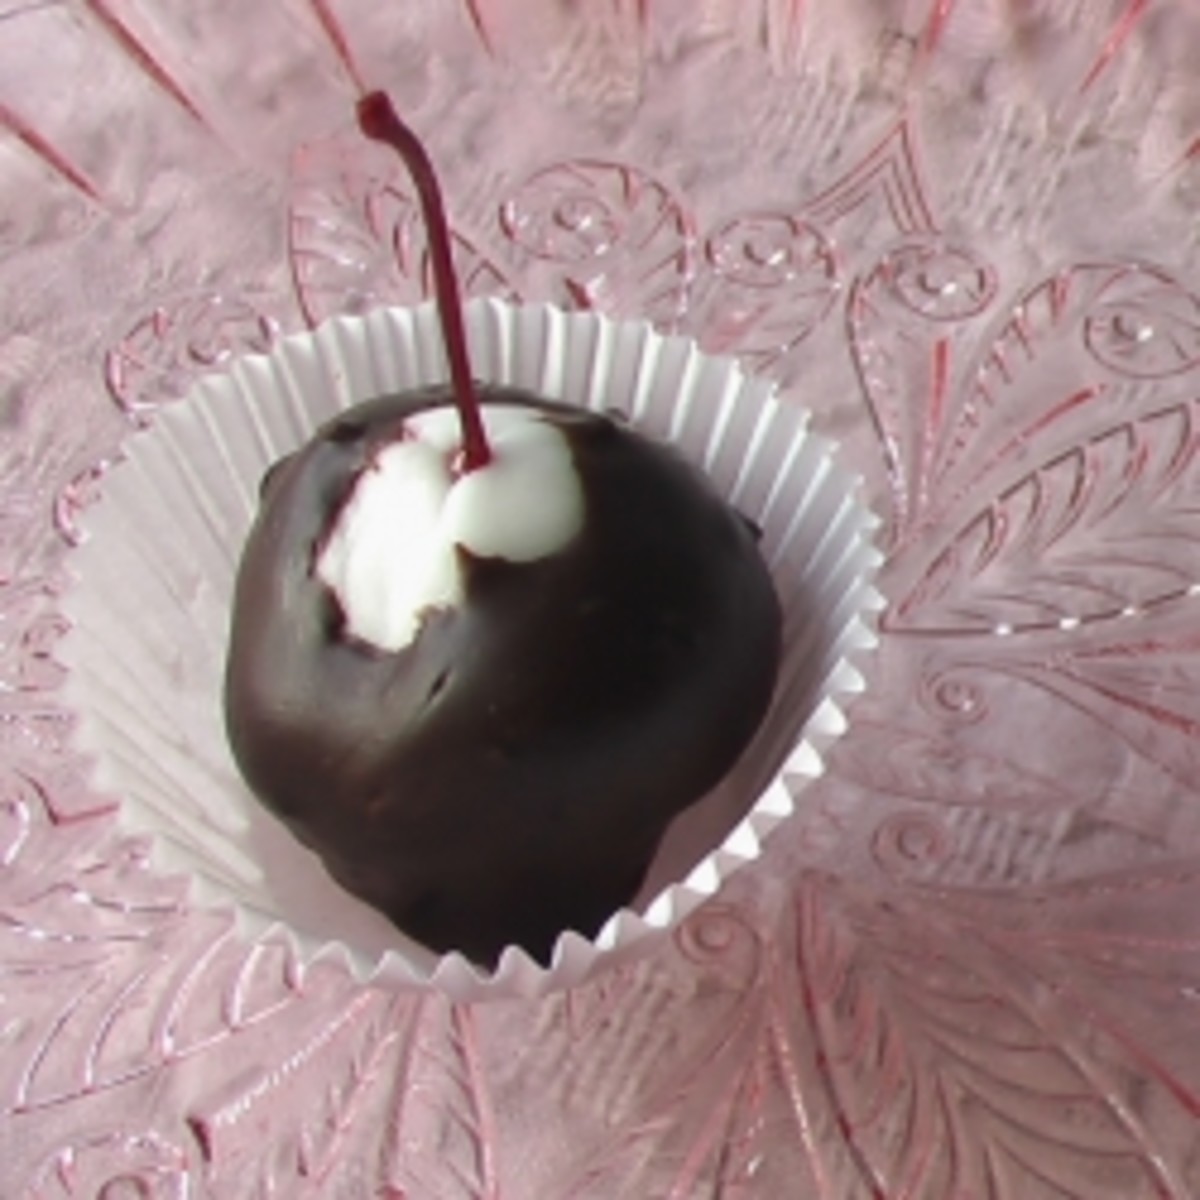 My Mother's Chocolate Covered Cherries